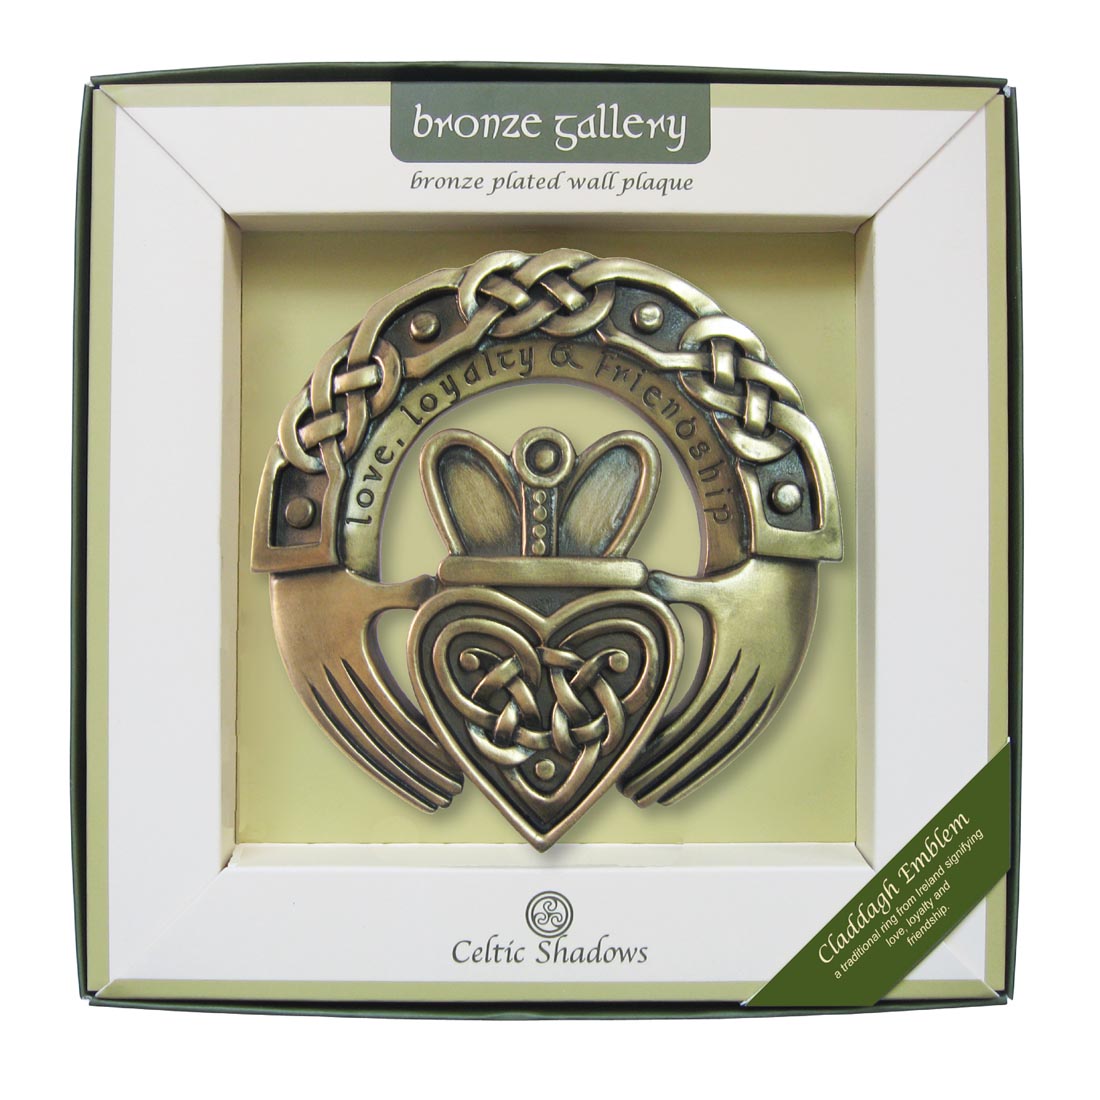 Wooden Wall Plaque With Irish Home Blessing